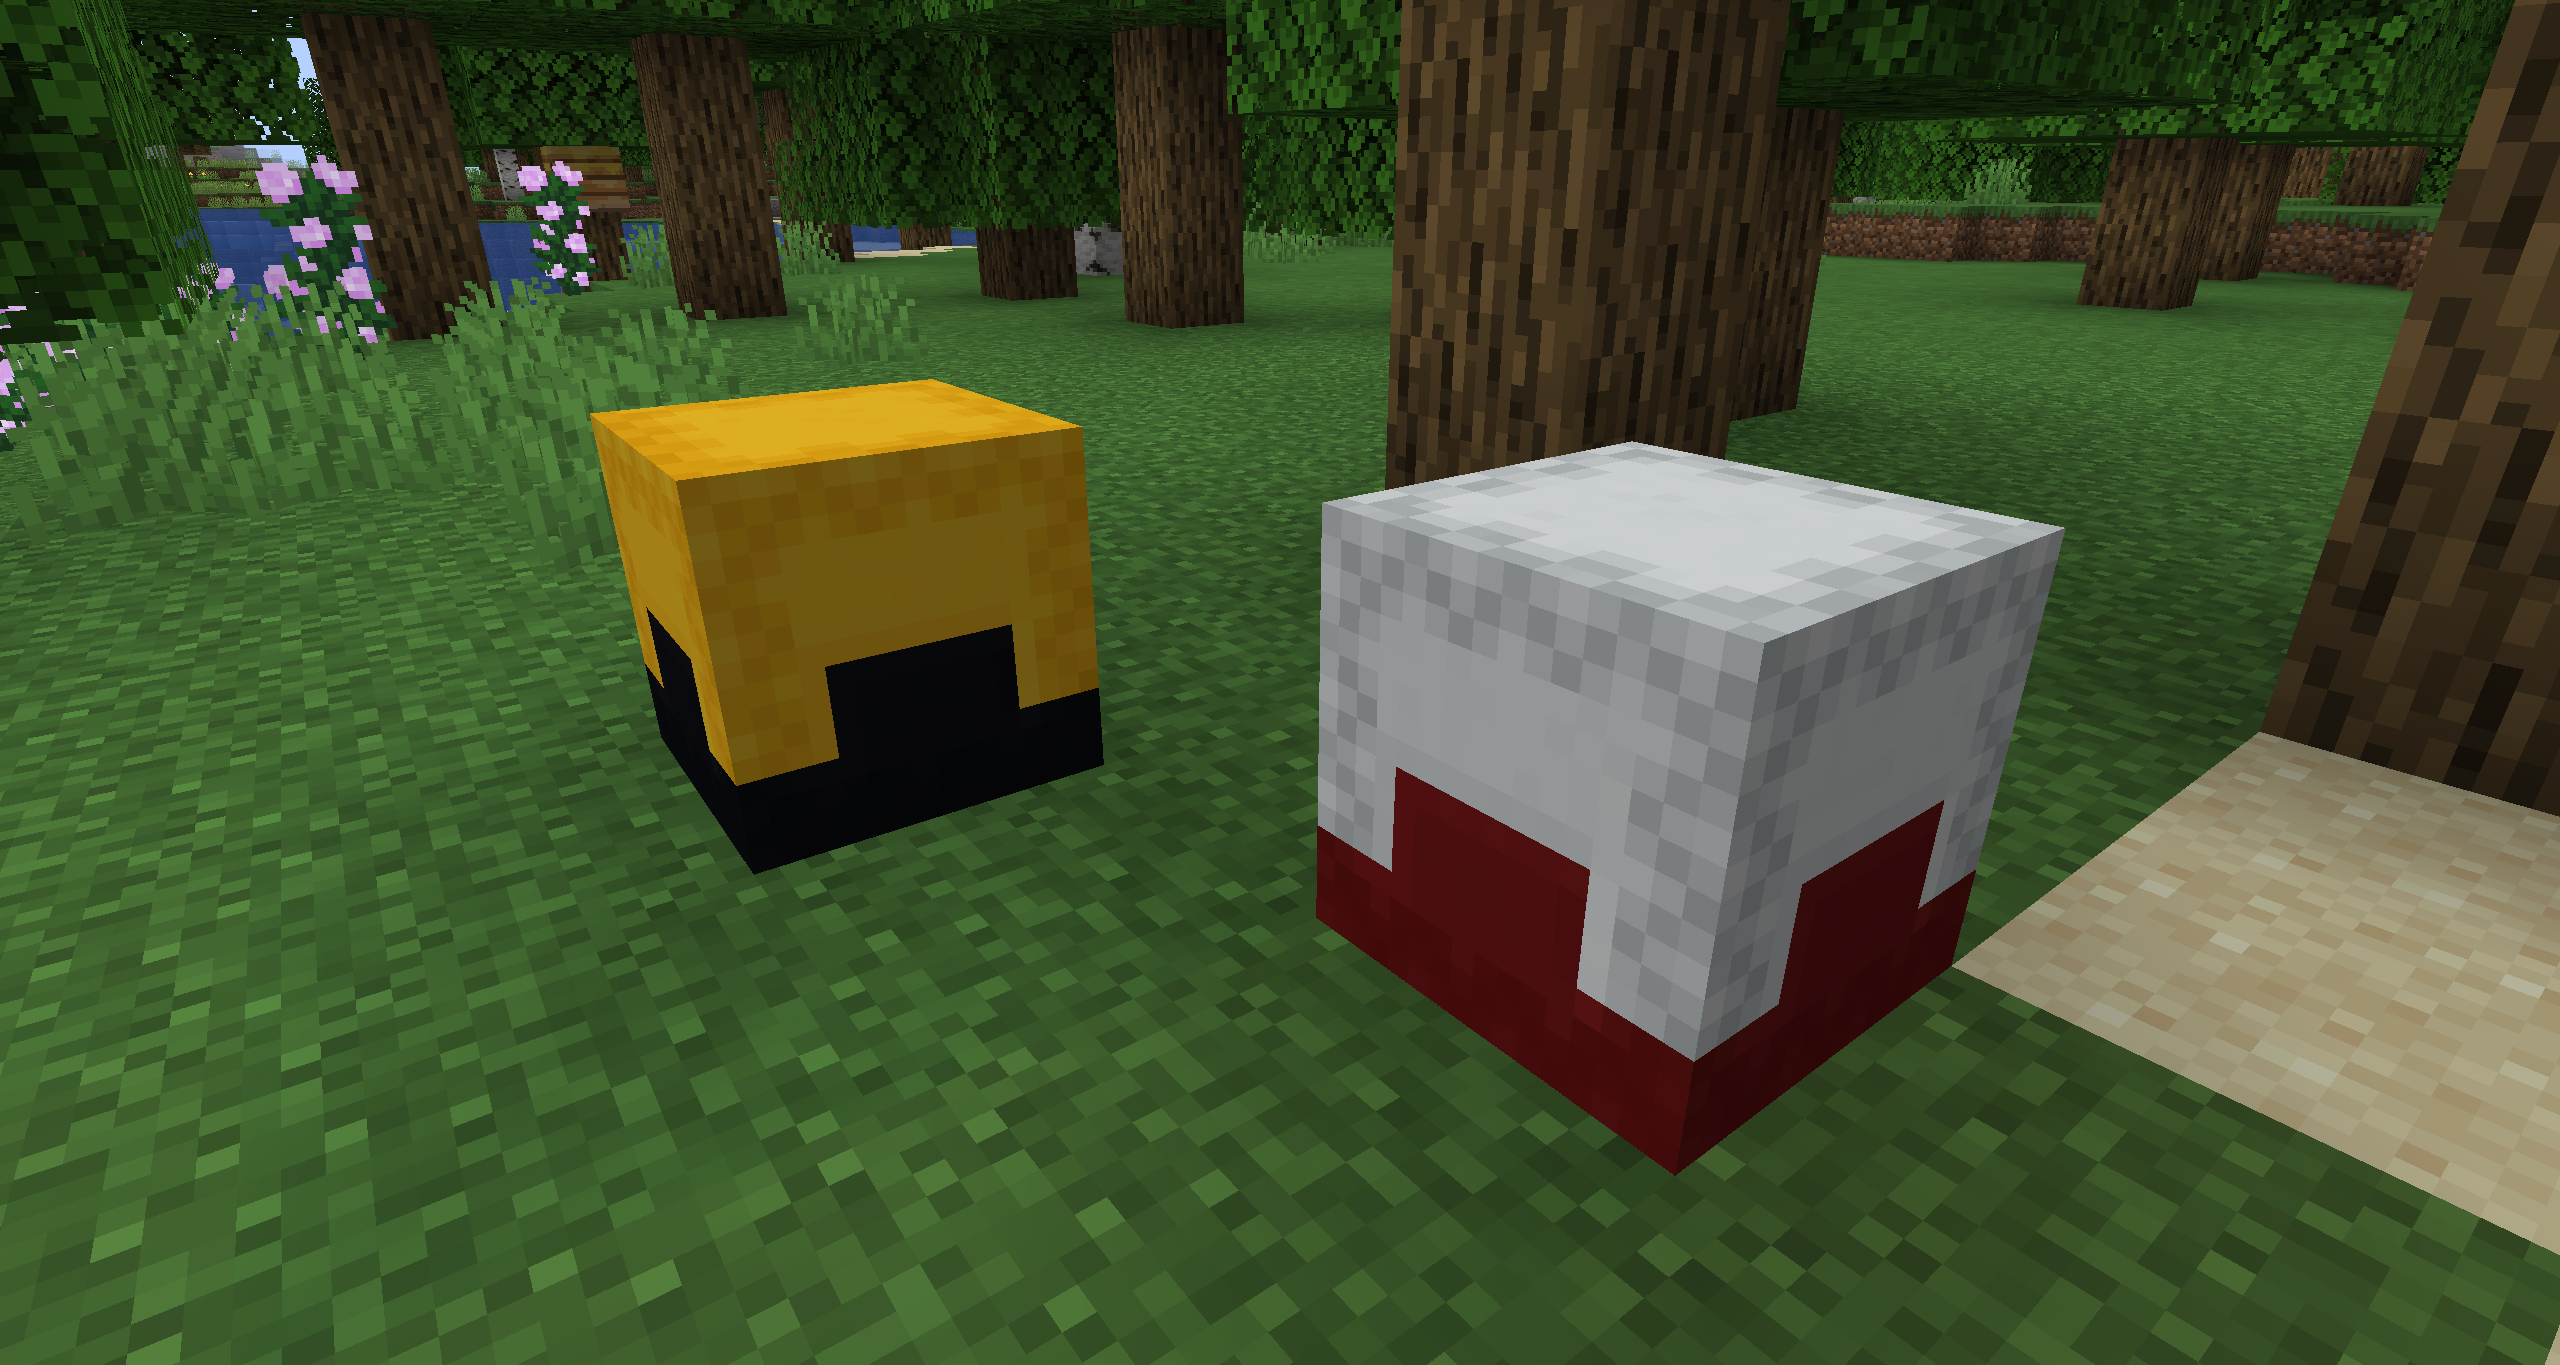 Two multi-color shulker boxes placed in the world